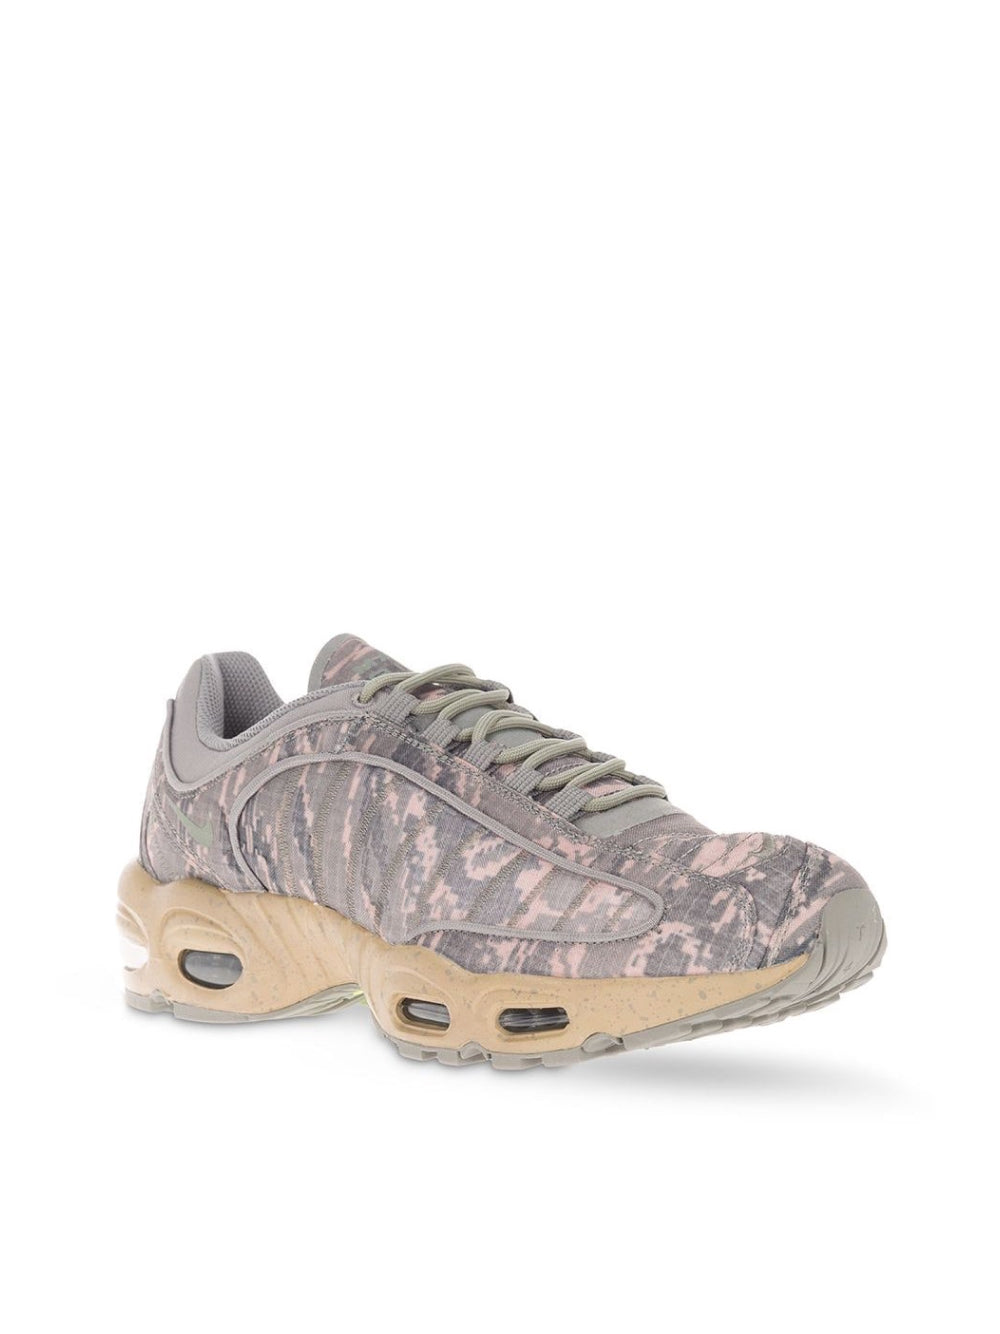 Nike-OUTLET-SALE-Air Max Tailwind IV SP Sneakers-ARCHIVIST